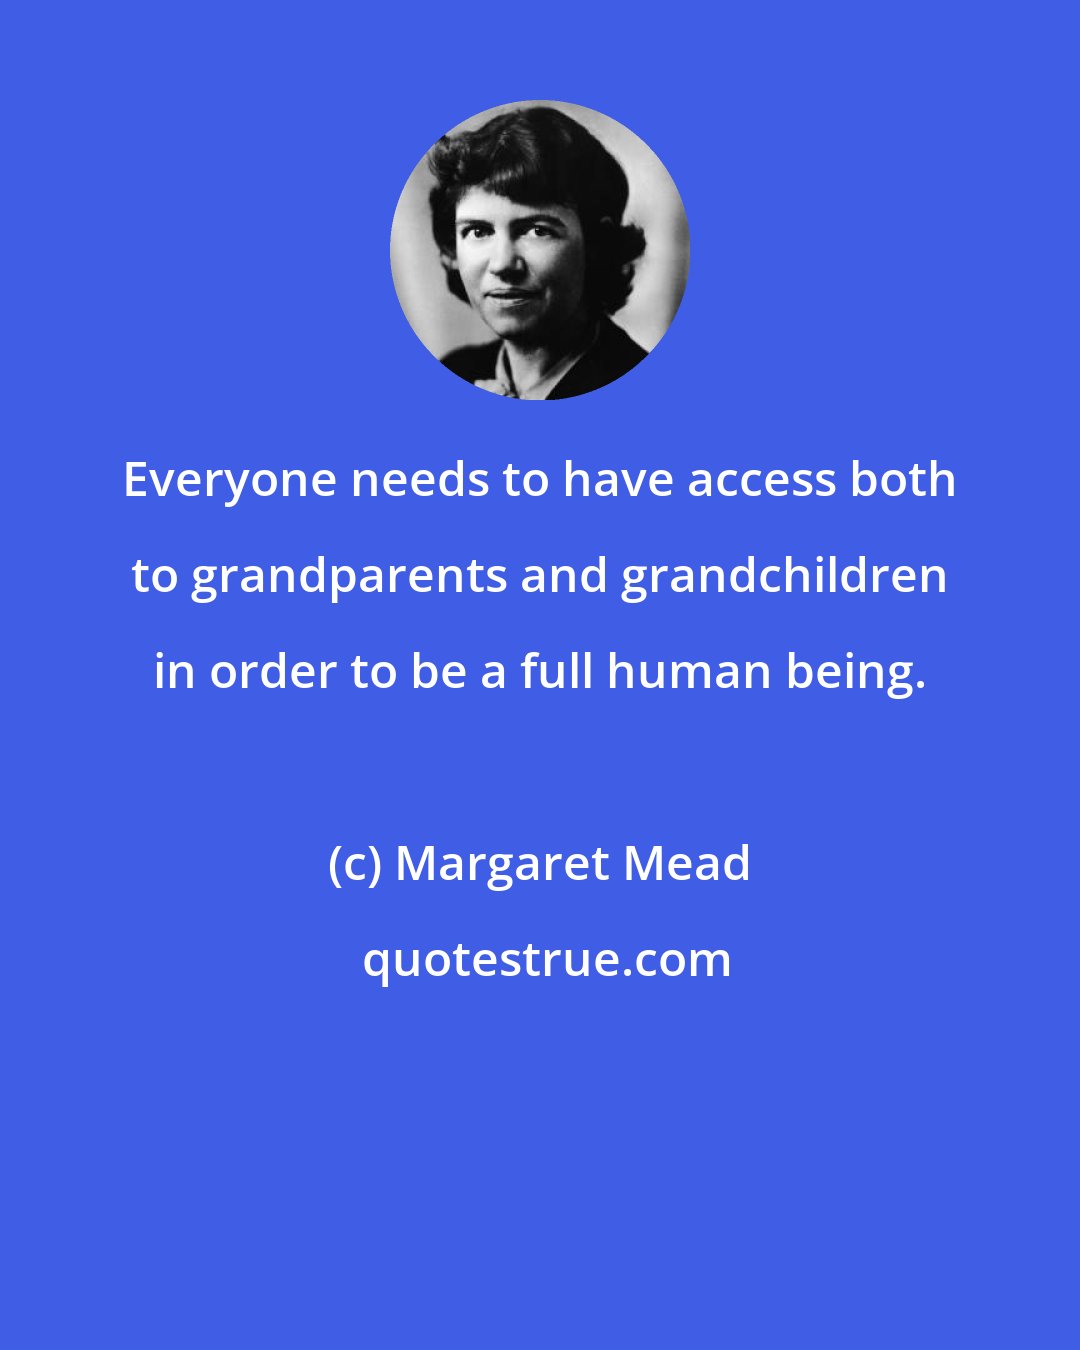 Margaret Mead: Everyone needs to have access both to grandparents and grandchildren in order to be a full human being.